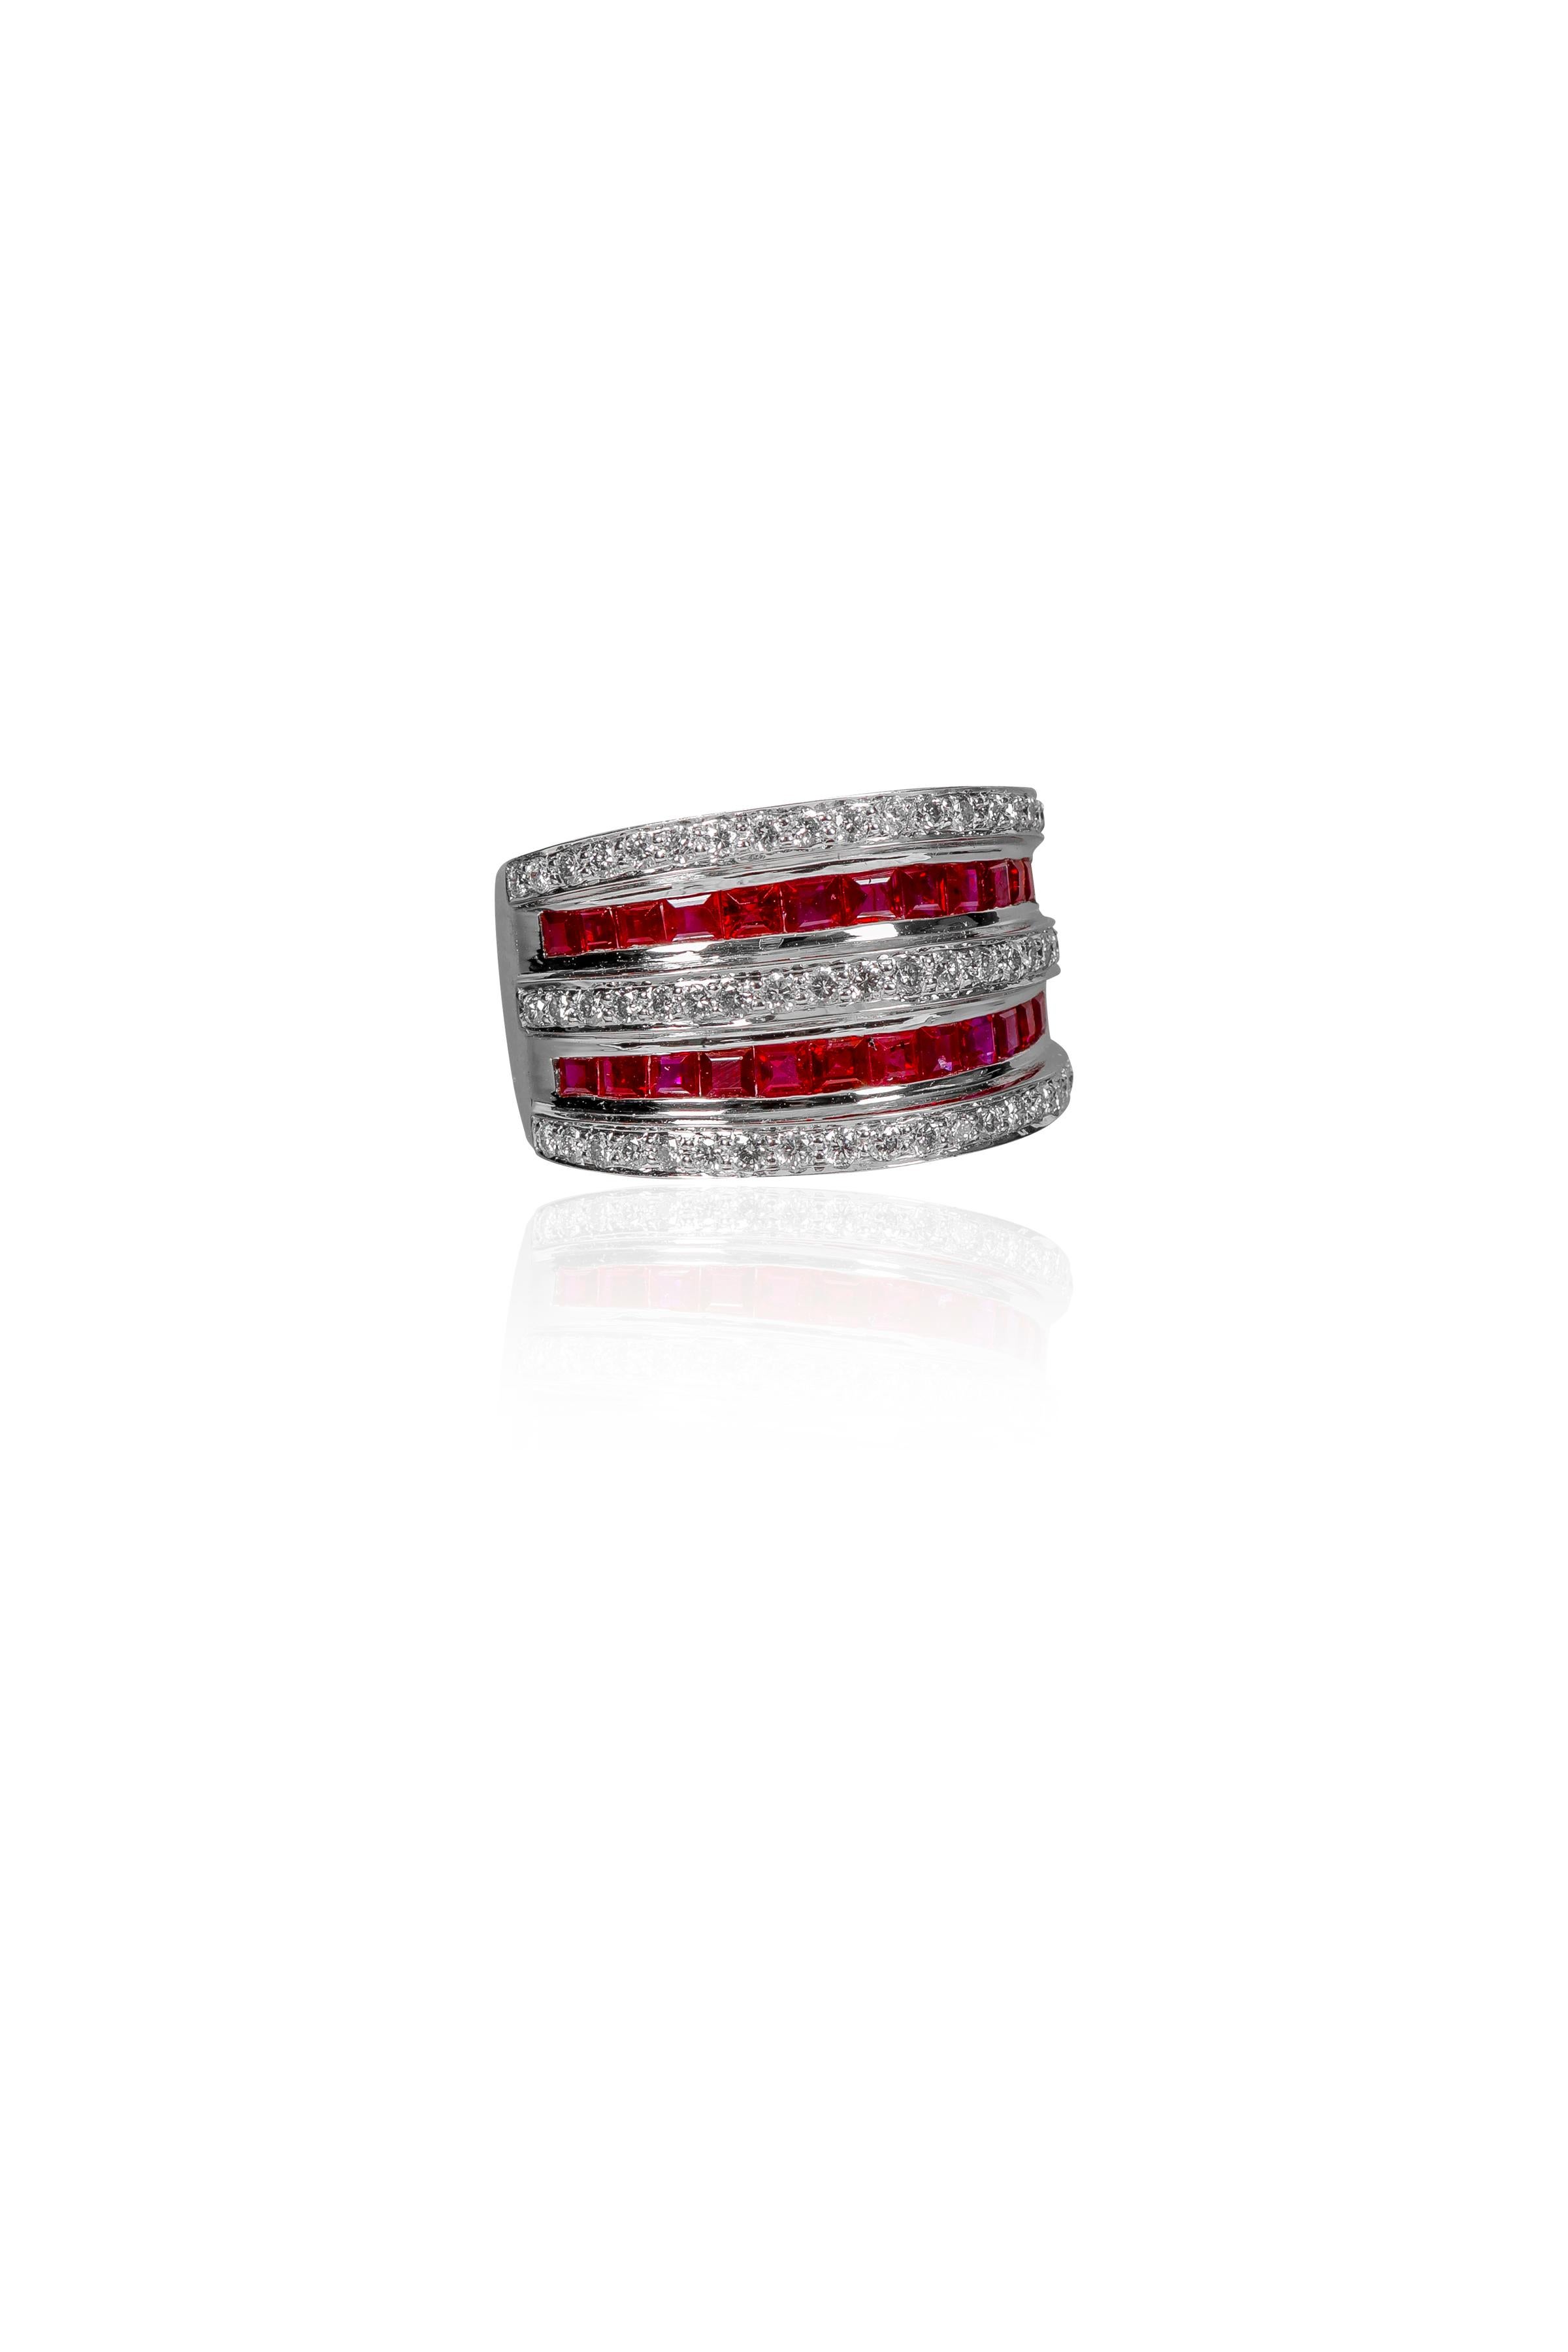 18 Karat White Gold 1.78 Carat Ruby and Diamond Cocktail Band Ring

This elegant broad 5 row is with alternate rows of perfectly cut and sized blazing red square rubies and brilliant round diamonds. The thin layer of 18k white gold not only serves